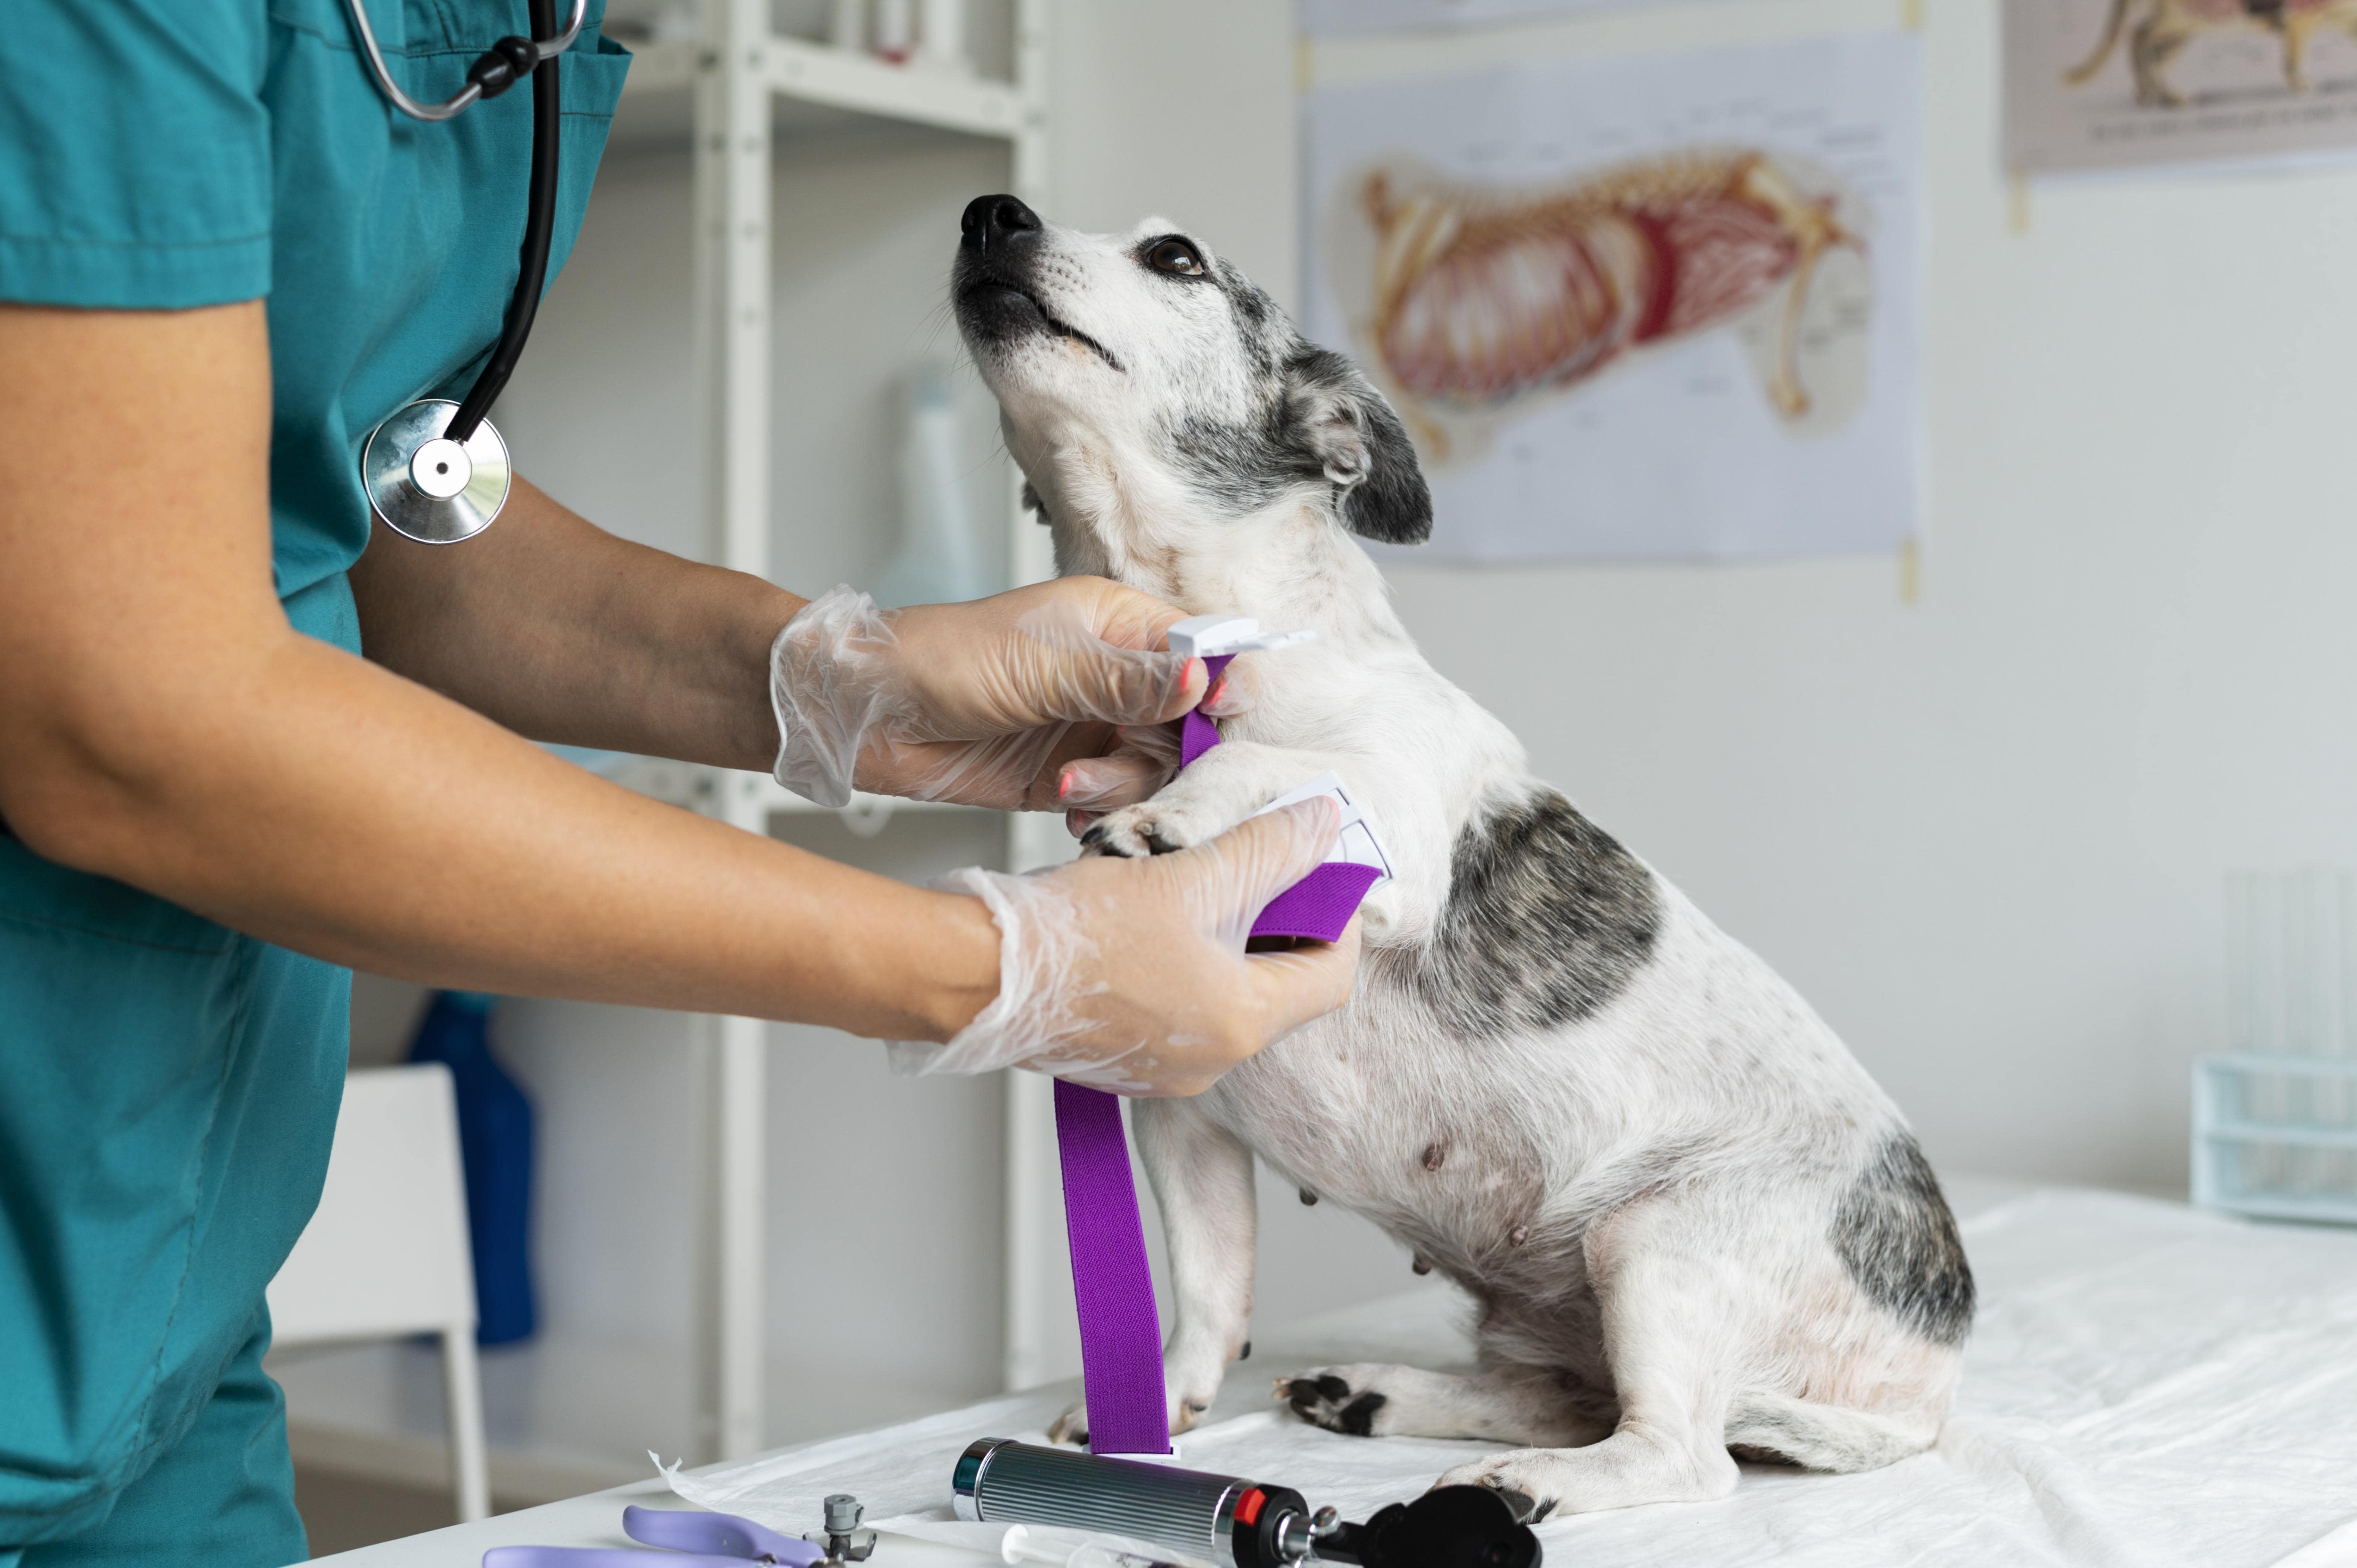 Annual Health check ups for pets